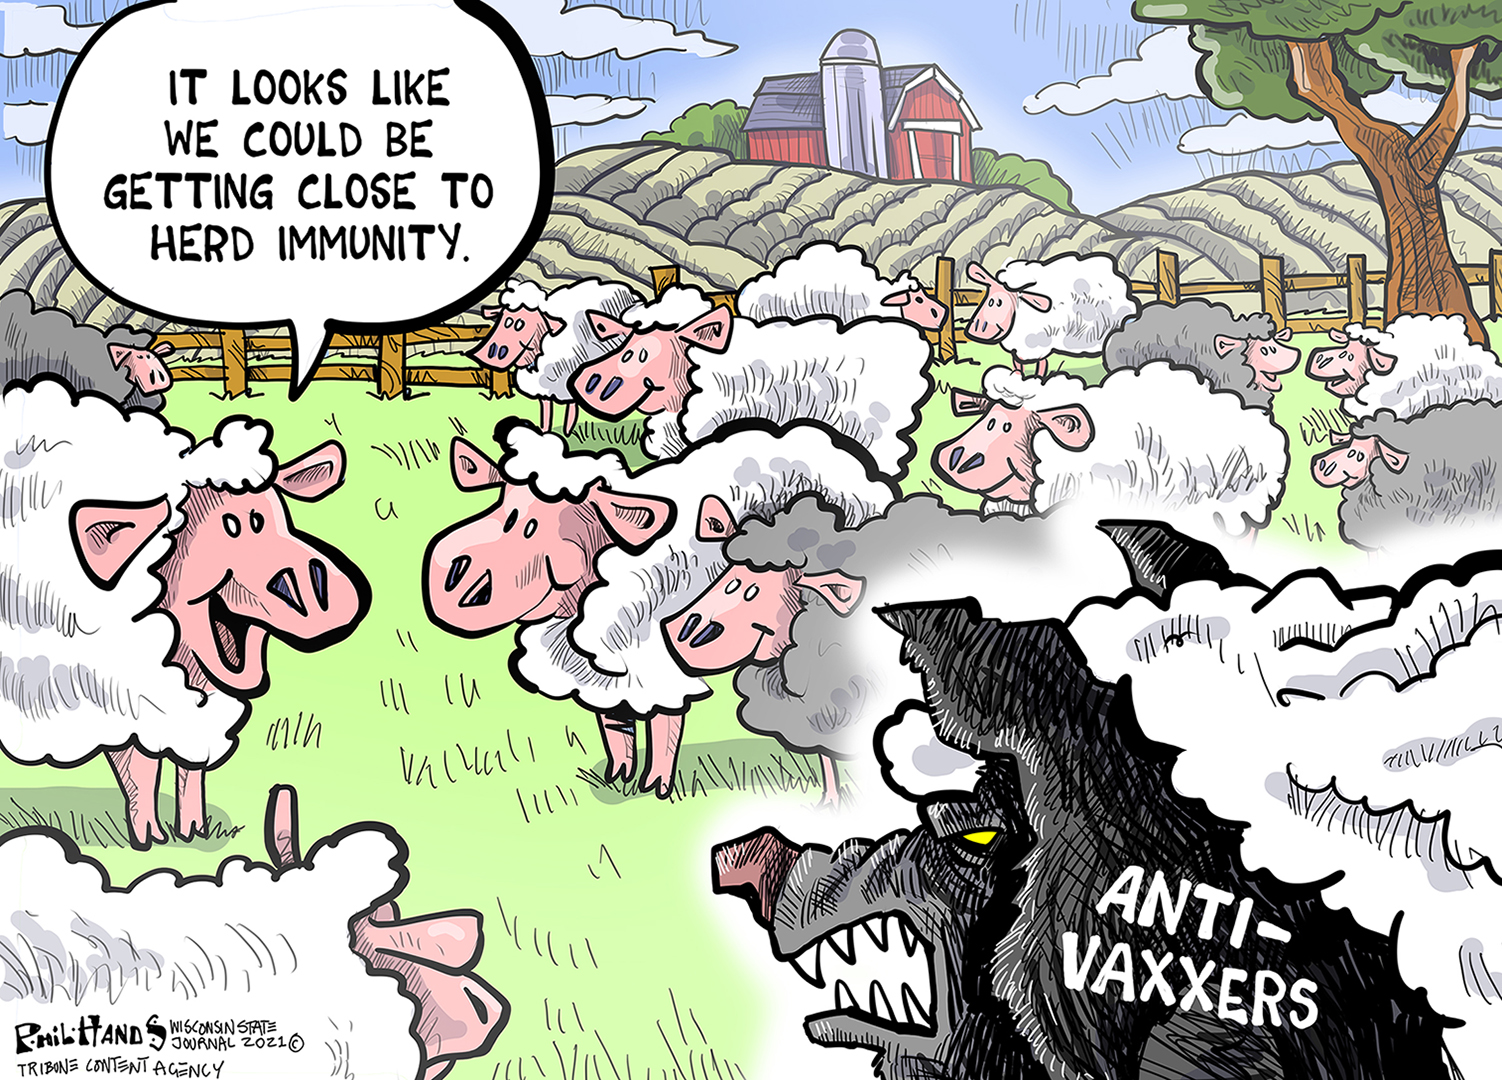 5 scathingly funny cartoons about anti-vaxxers jeopardizing herd immunity |  The Week